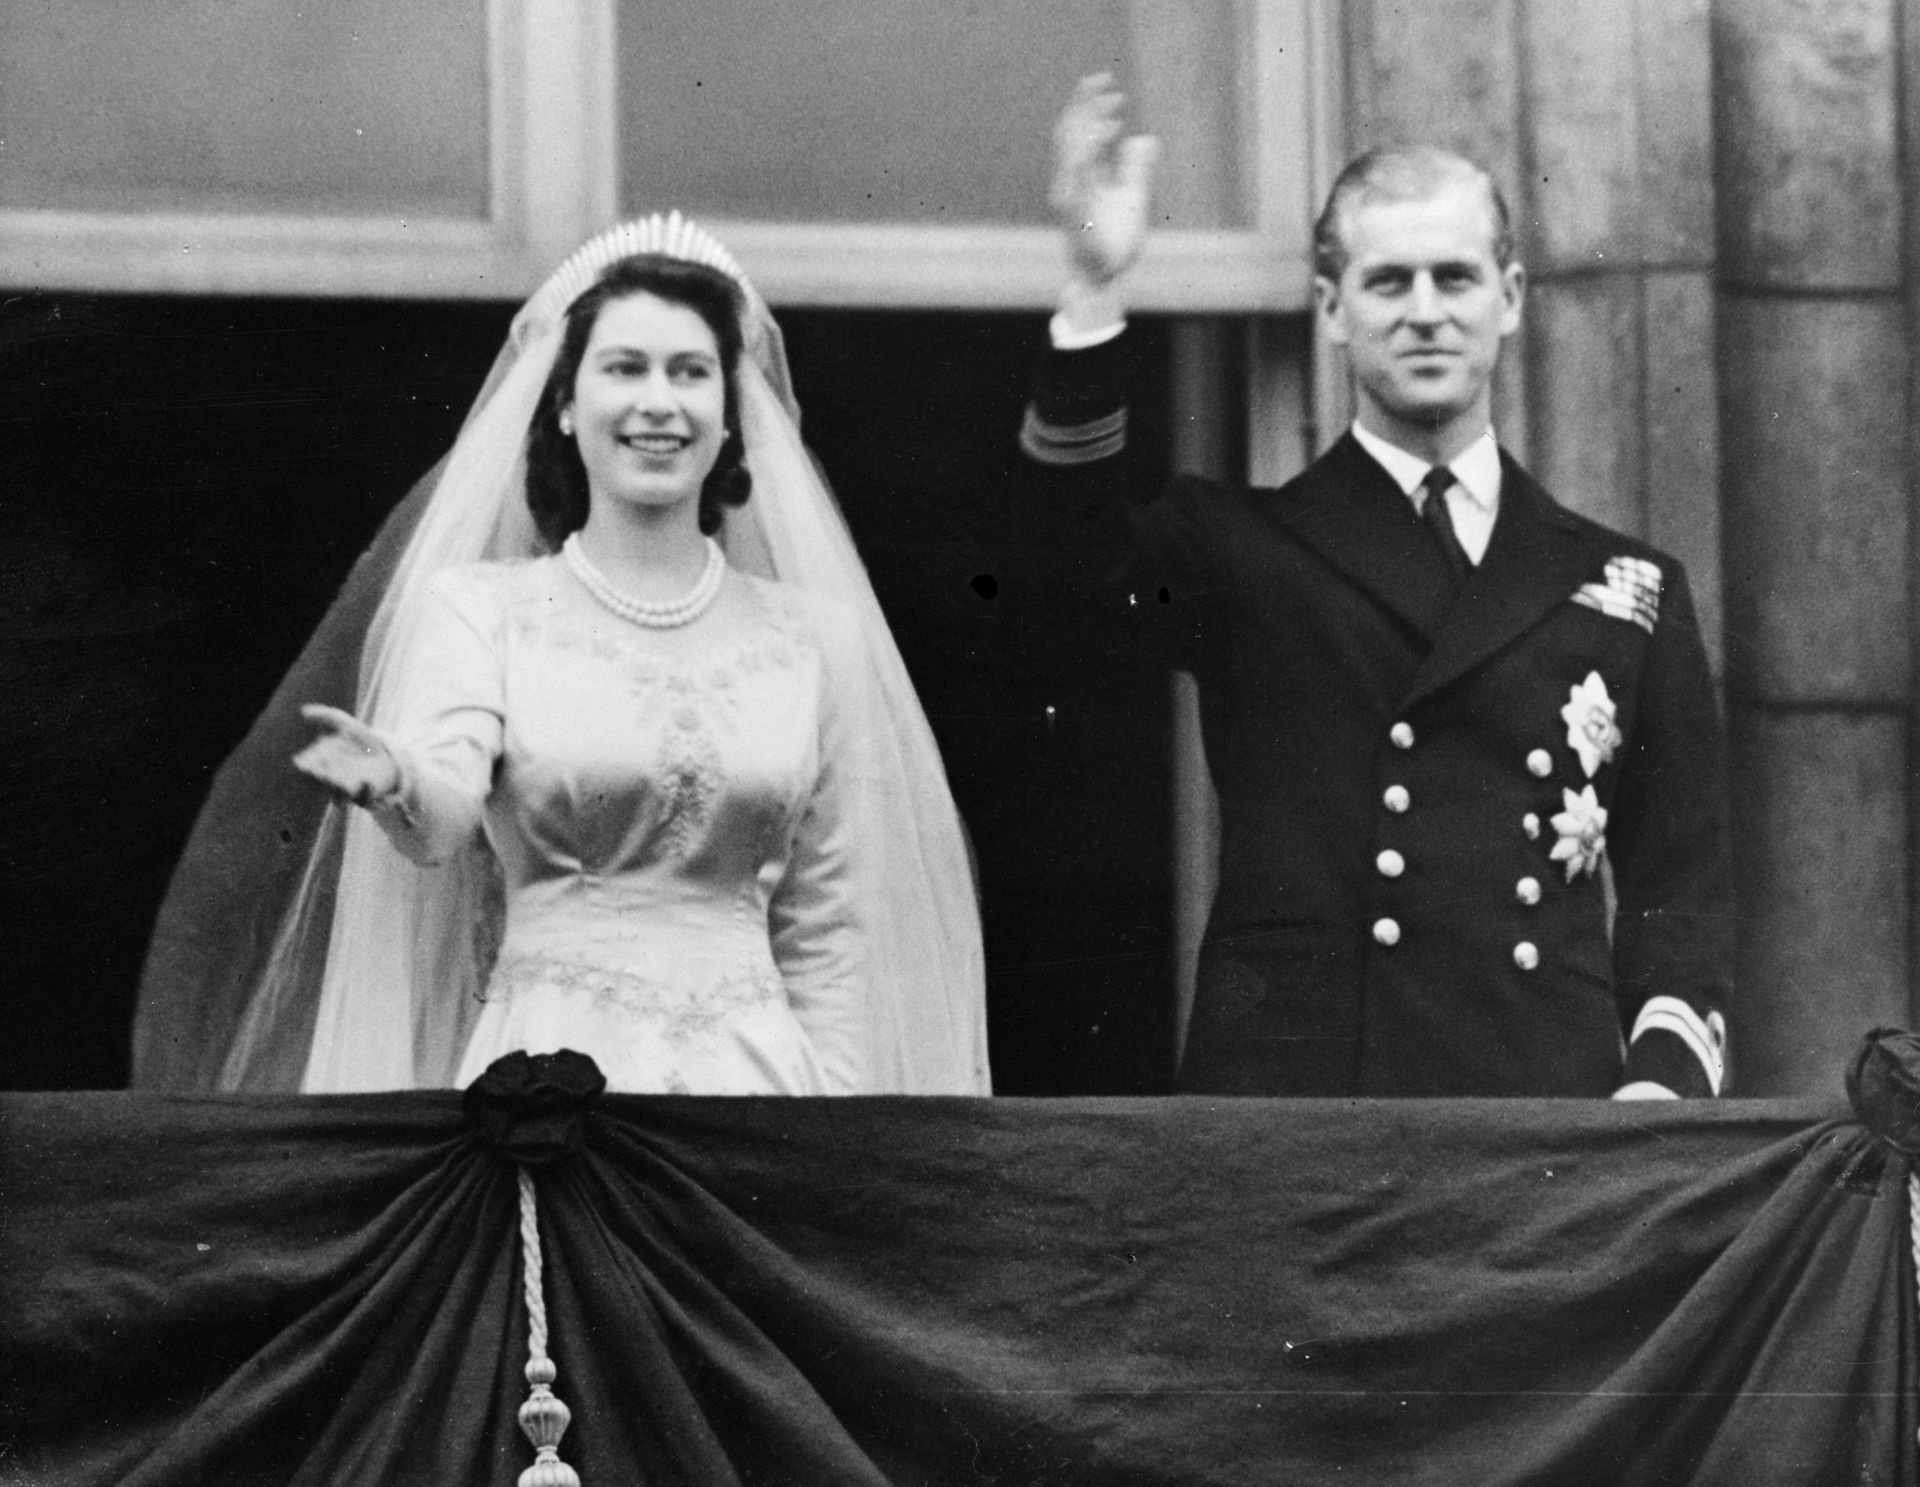 Princess Elizabeth and Prince Philip wave from the Buckingham Palace balcony after their wedding in 1947.